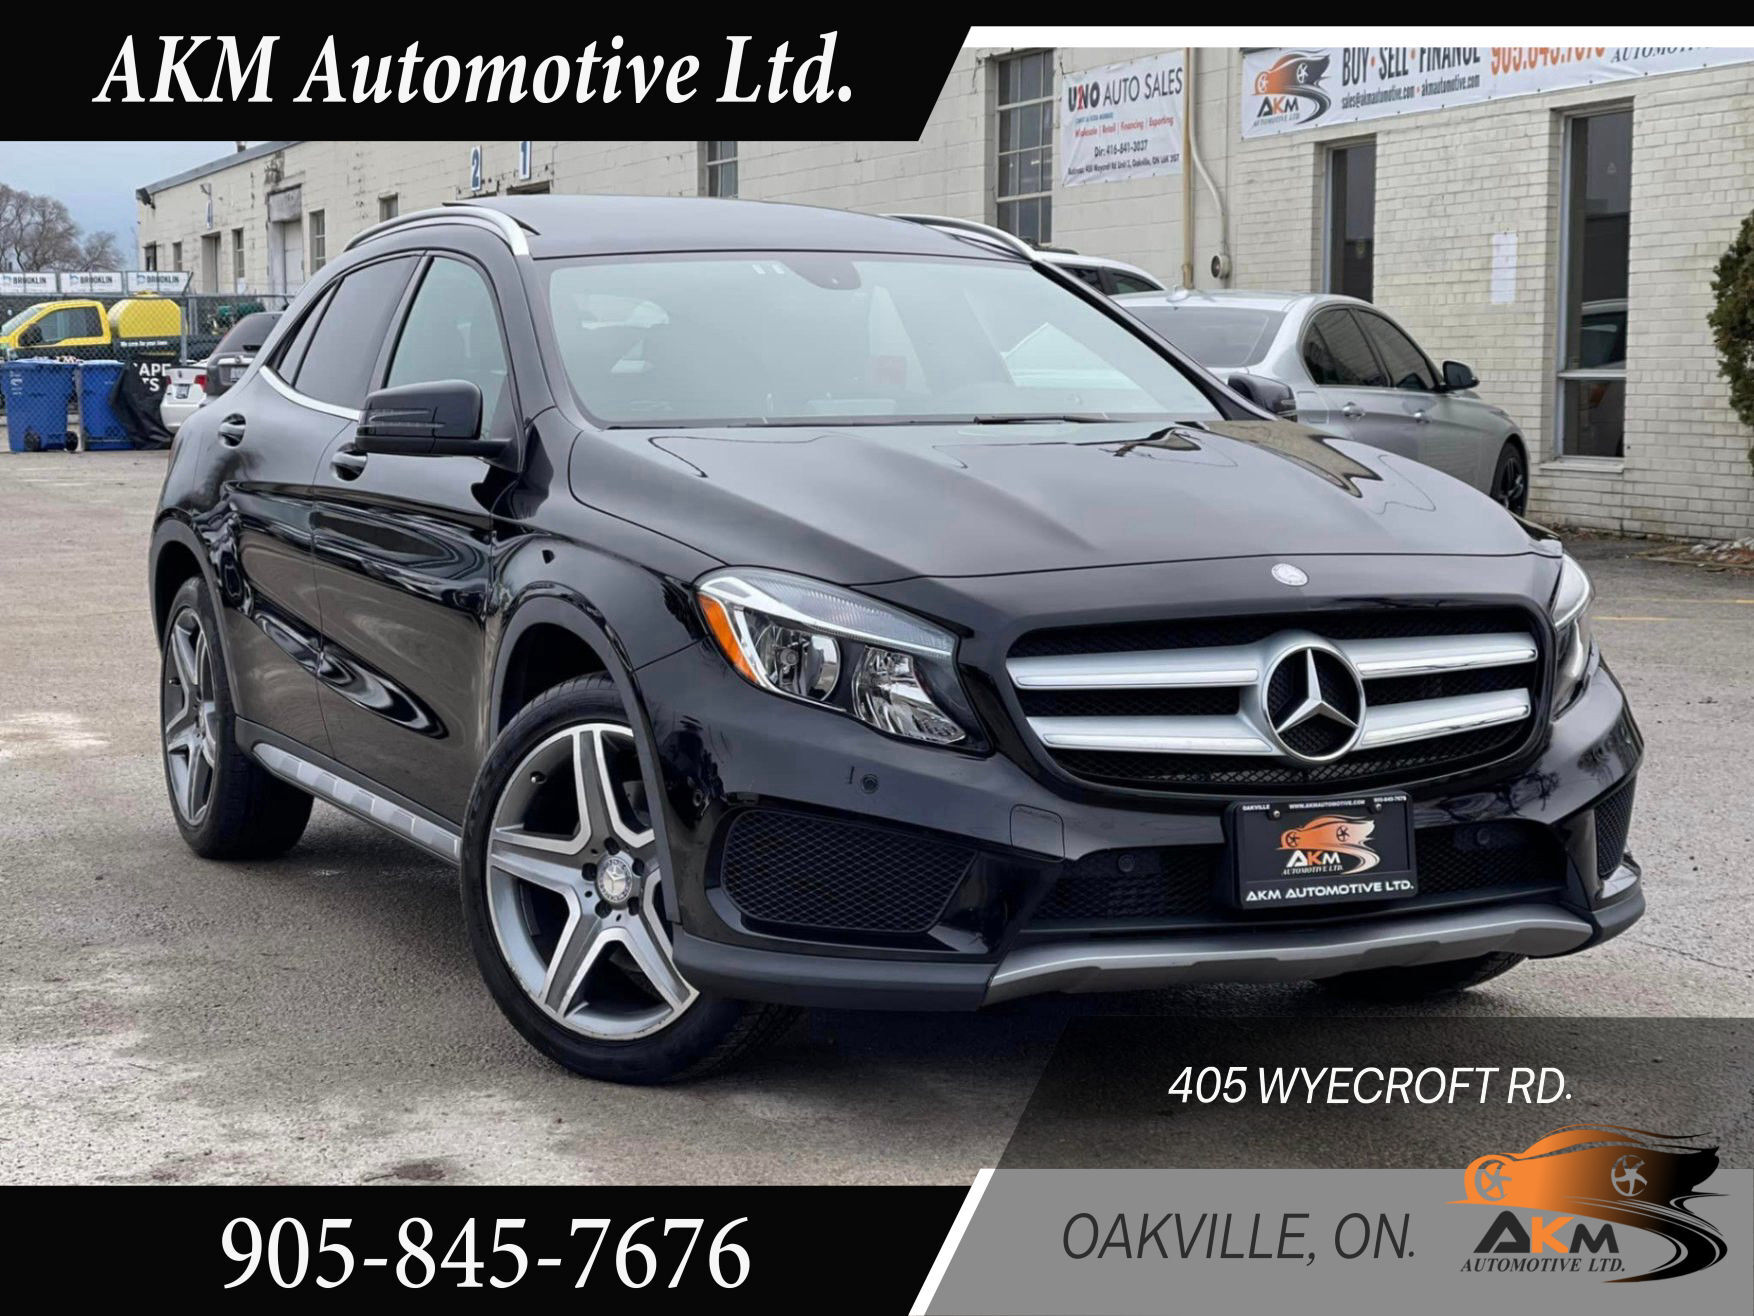 2015 Mercedes-Benz GLA-Class 4MATIC 4dr GLA 250 ACCIDENT FREE, Certified